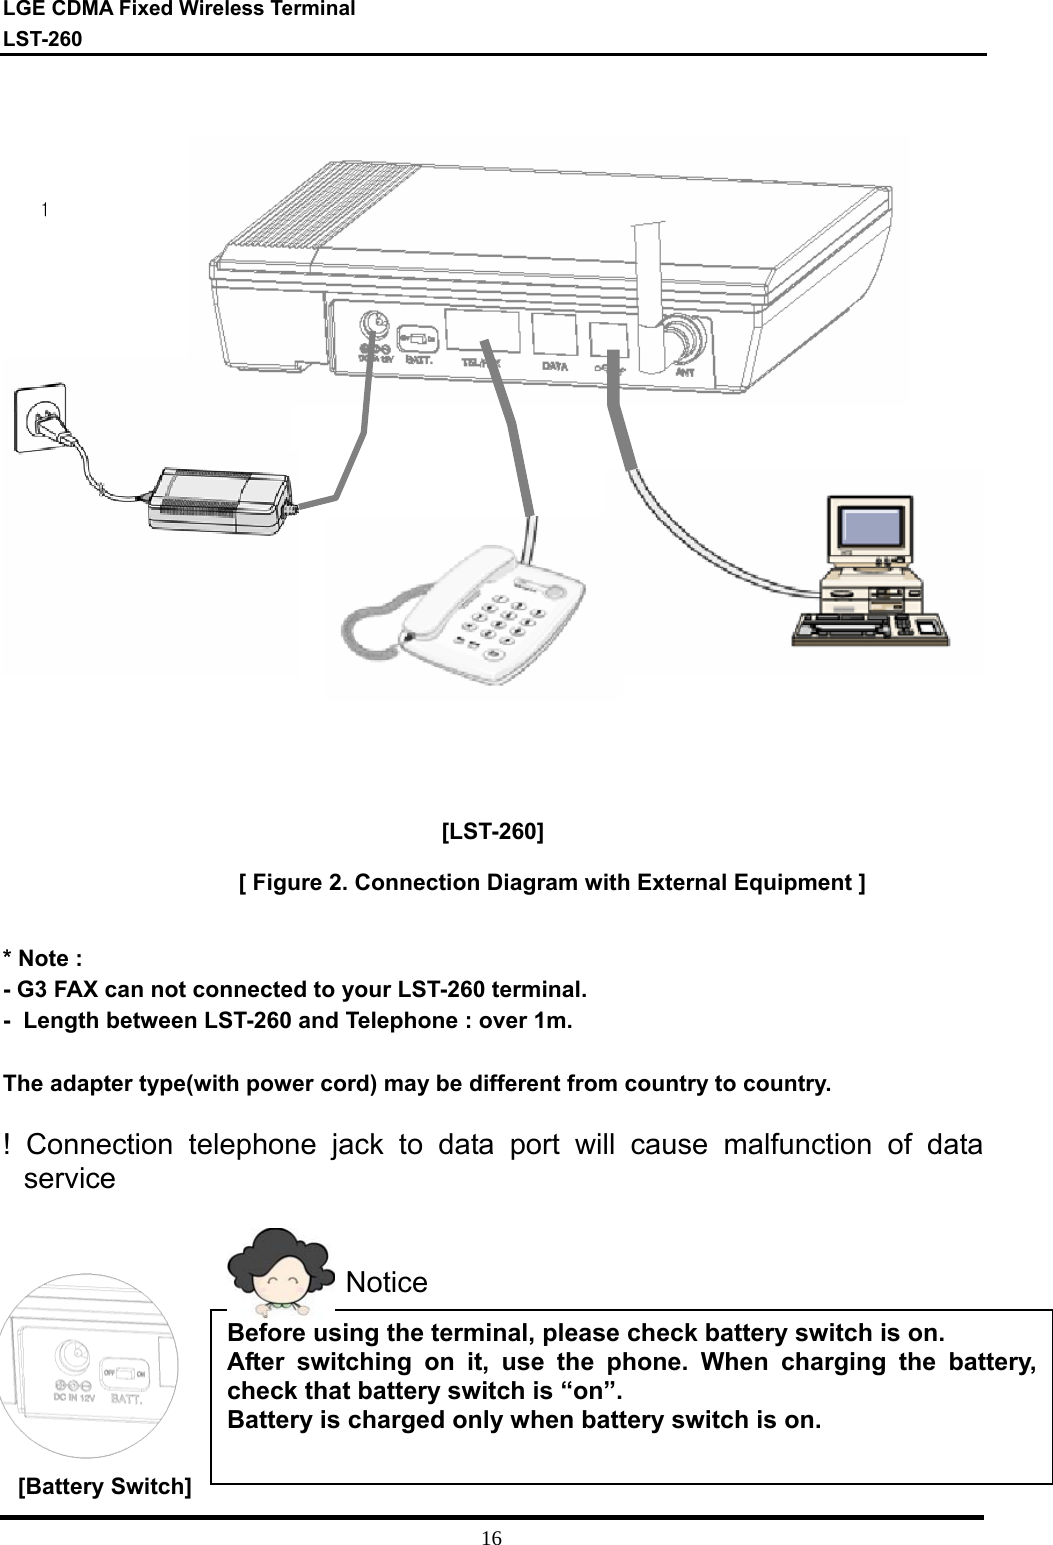 LGE CDMA Fixed Wireless Terminal LST-260         16     [LST-260]  [ Figure 2. Connection Diagram with External Equipment ]  * Note :  - G3 FAX can not connected to your LST-260 terminal. -  Length between LST-260 and Telephone : over 1m.  The adapter type(with power cord) may be different from country to country.  ! Connection telephone jack to data port will cause malfunction of data service          1  [Battery Switch] NoticeBefore using the terminal, please check battery switch is on.  After switching on it, use the phone. When charging the battery, check that battery switch is “on”. Battery is charged only when battery switch is on.  